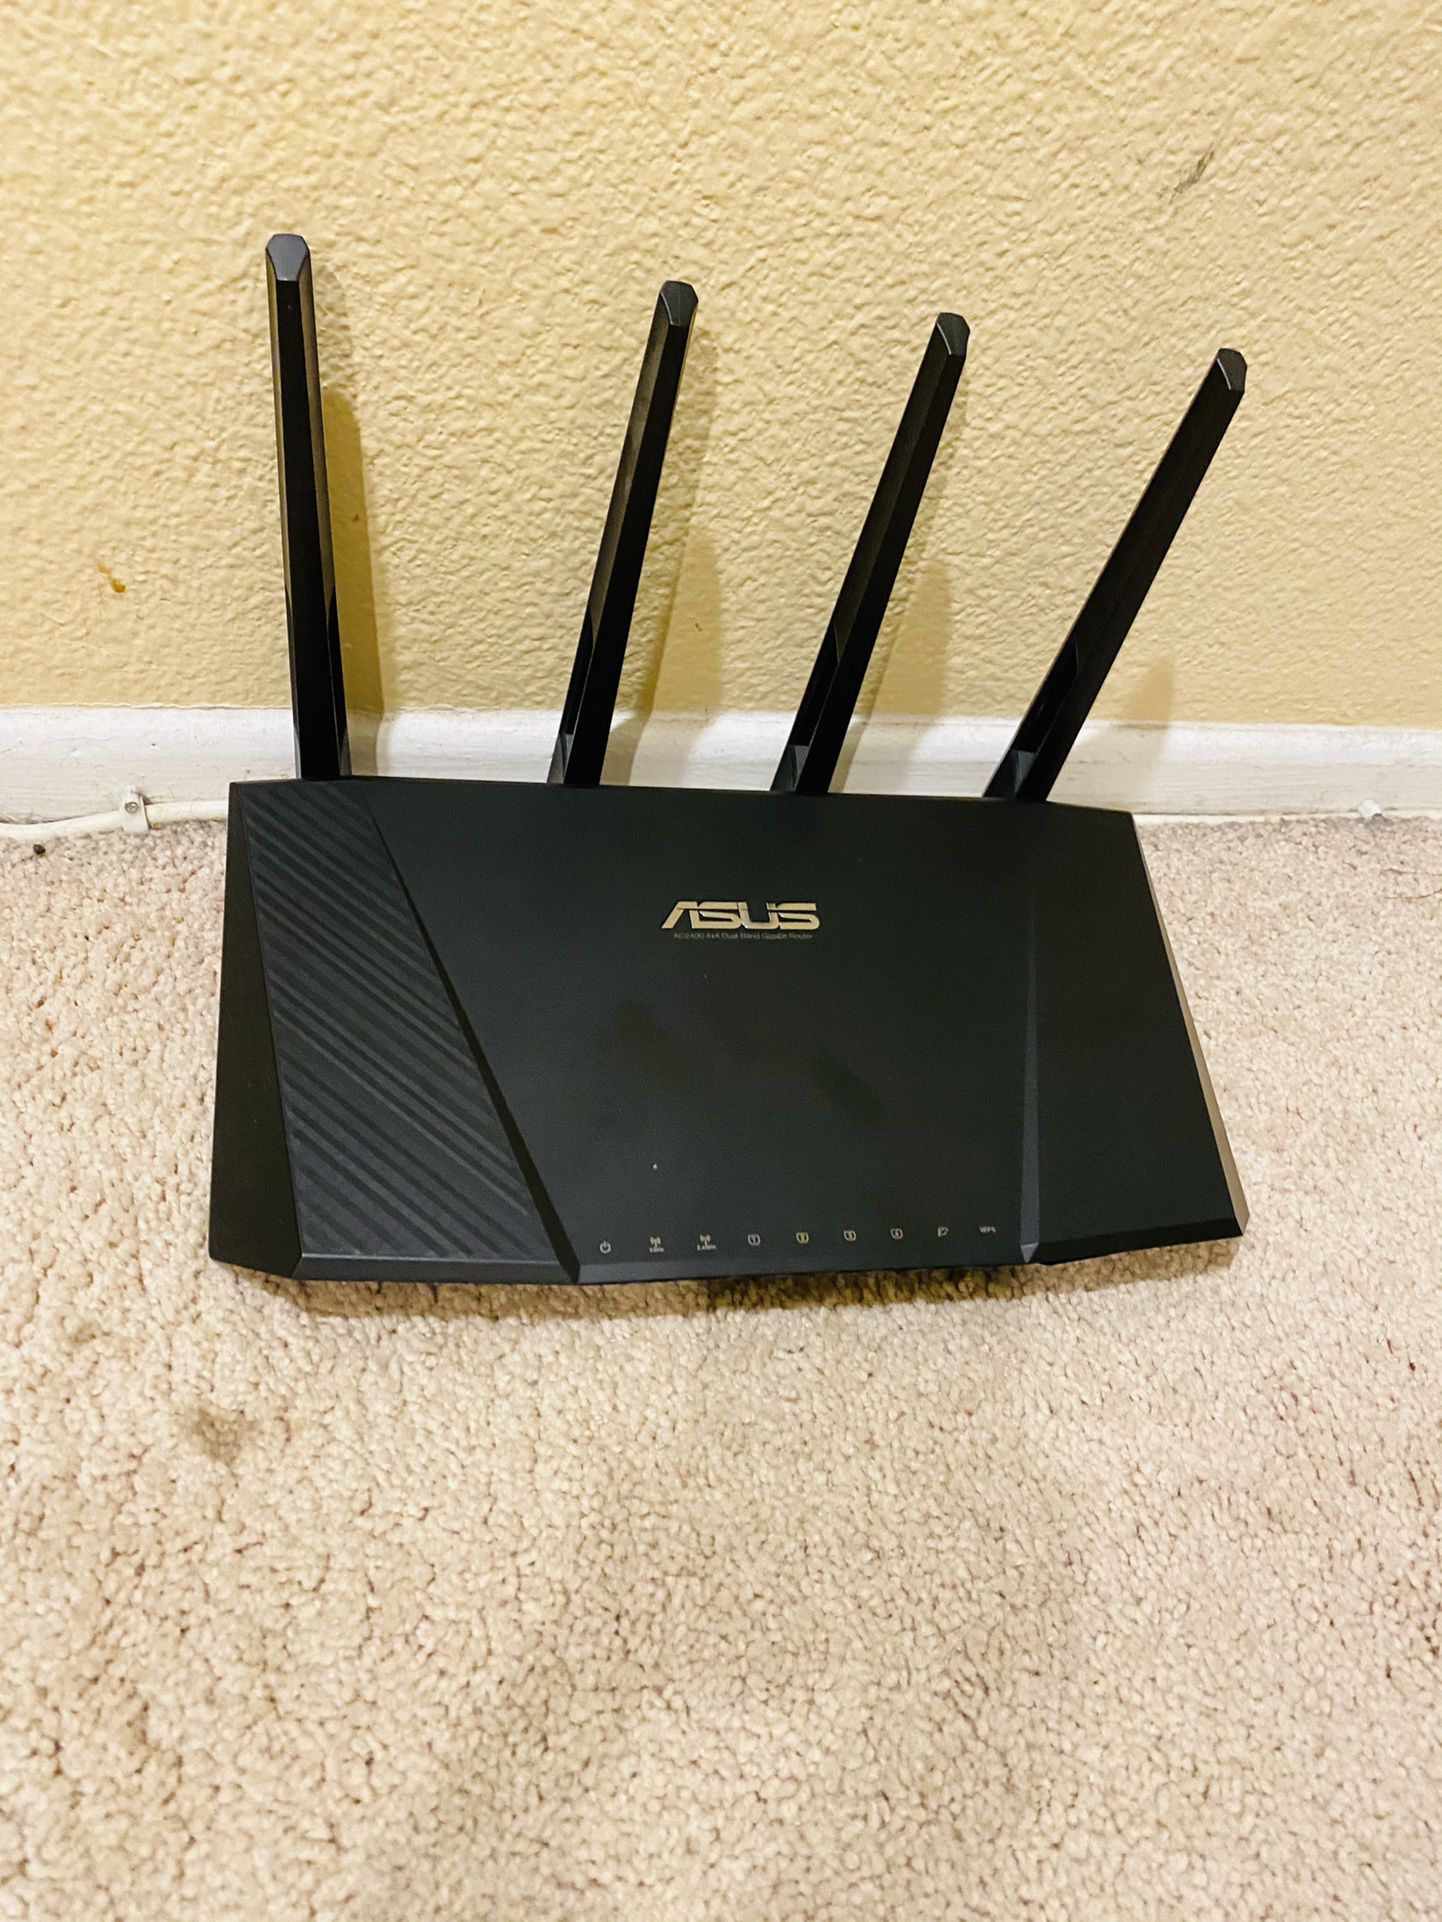 ASUS RT-AC87U Router